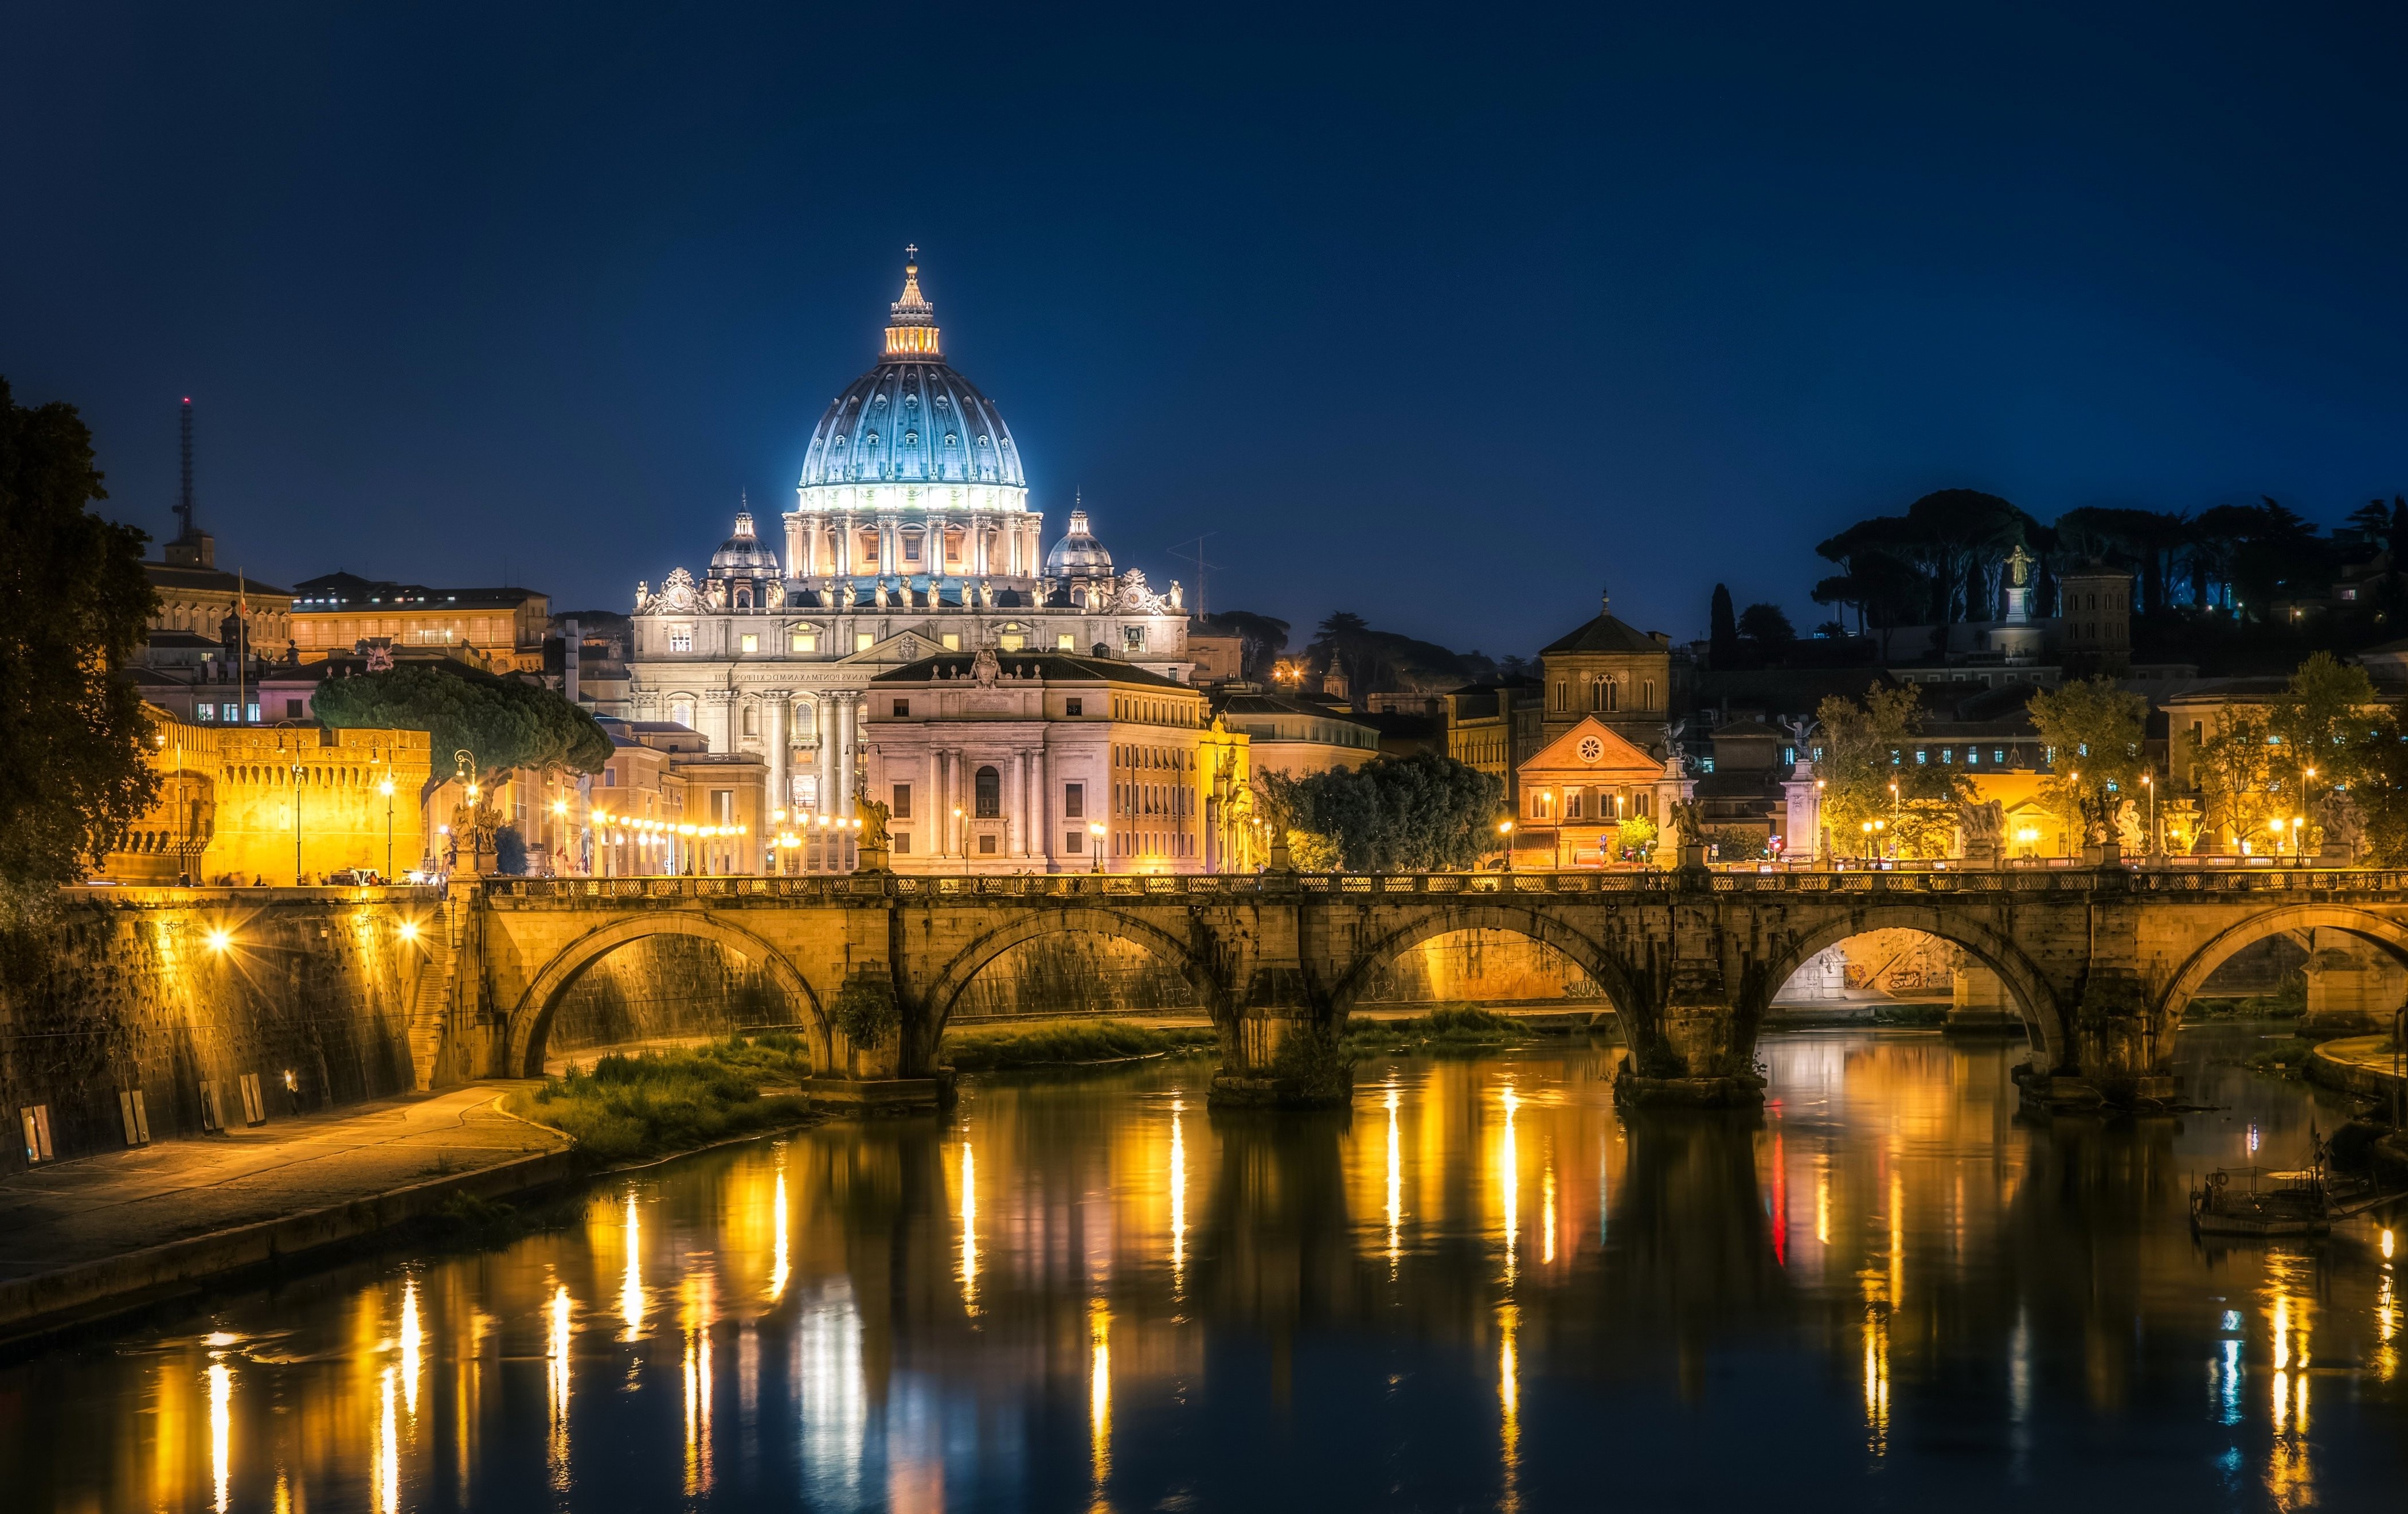 cityscape, Night, Lights, Architecture, Old building, Sky, Water, Reflection, Long exposure, Rome, Vatican City, Bridge, Trees, Italy, Cathedral Wallpaper